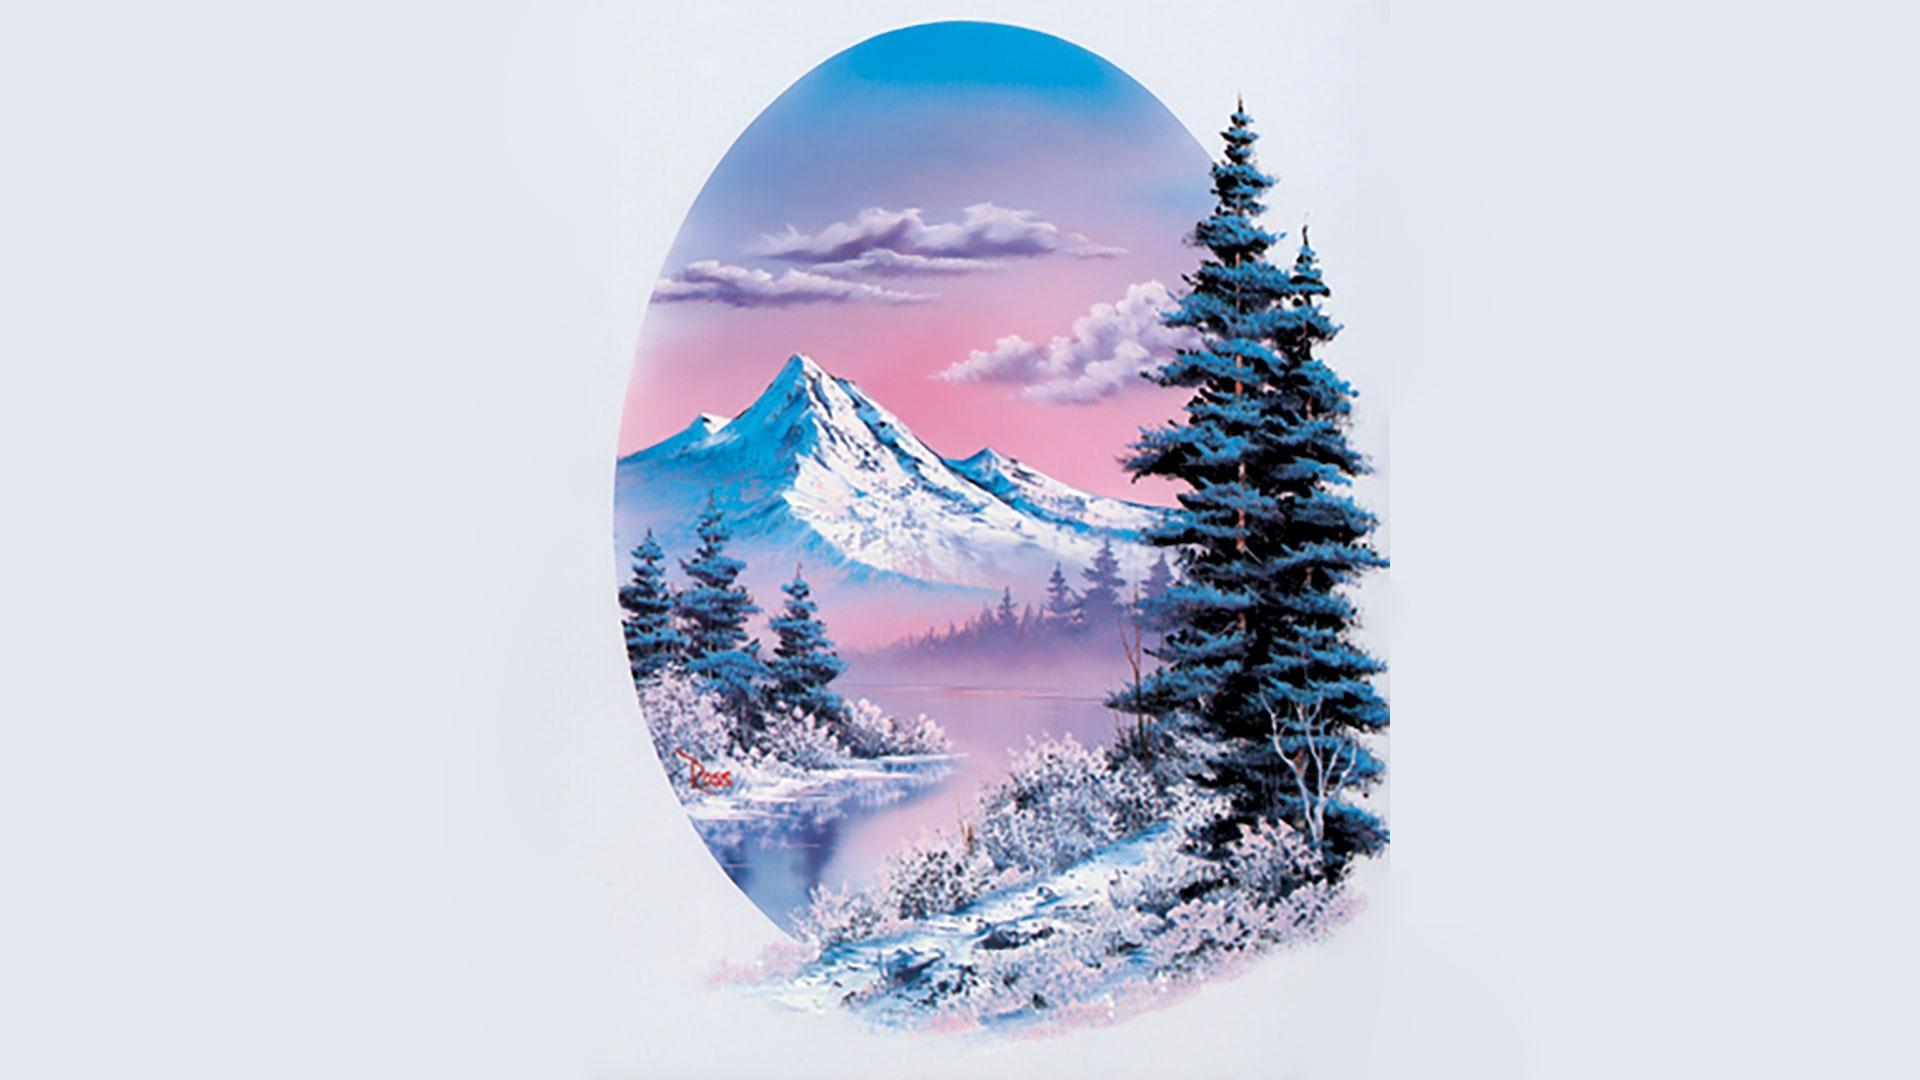 The Best Of The Joy Of Painting With Bob Ross | Hidden Winter Moon Oval |  Season 39 | Episode 3917 | Pbs